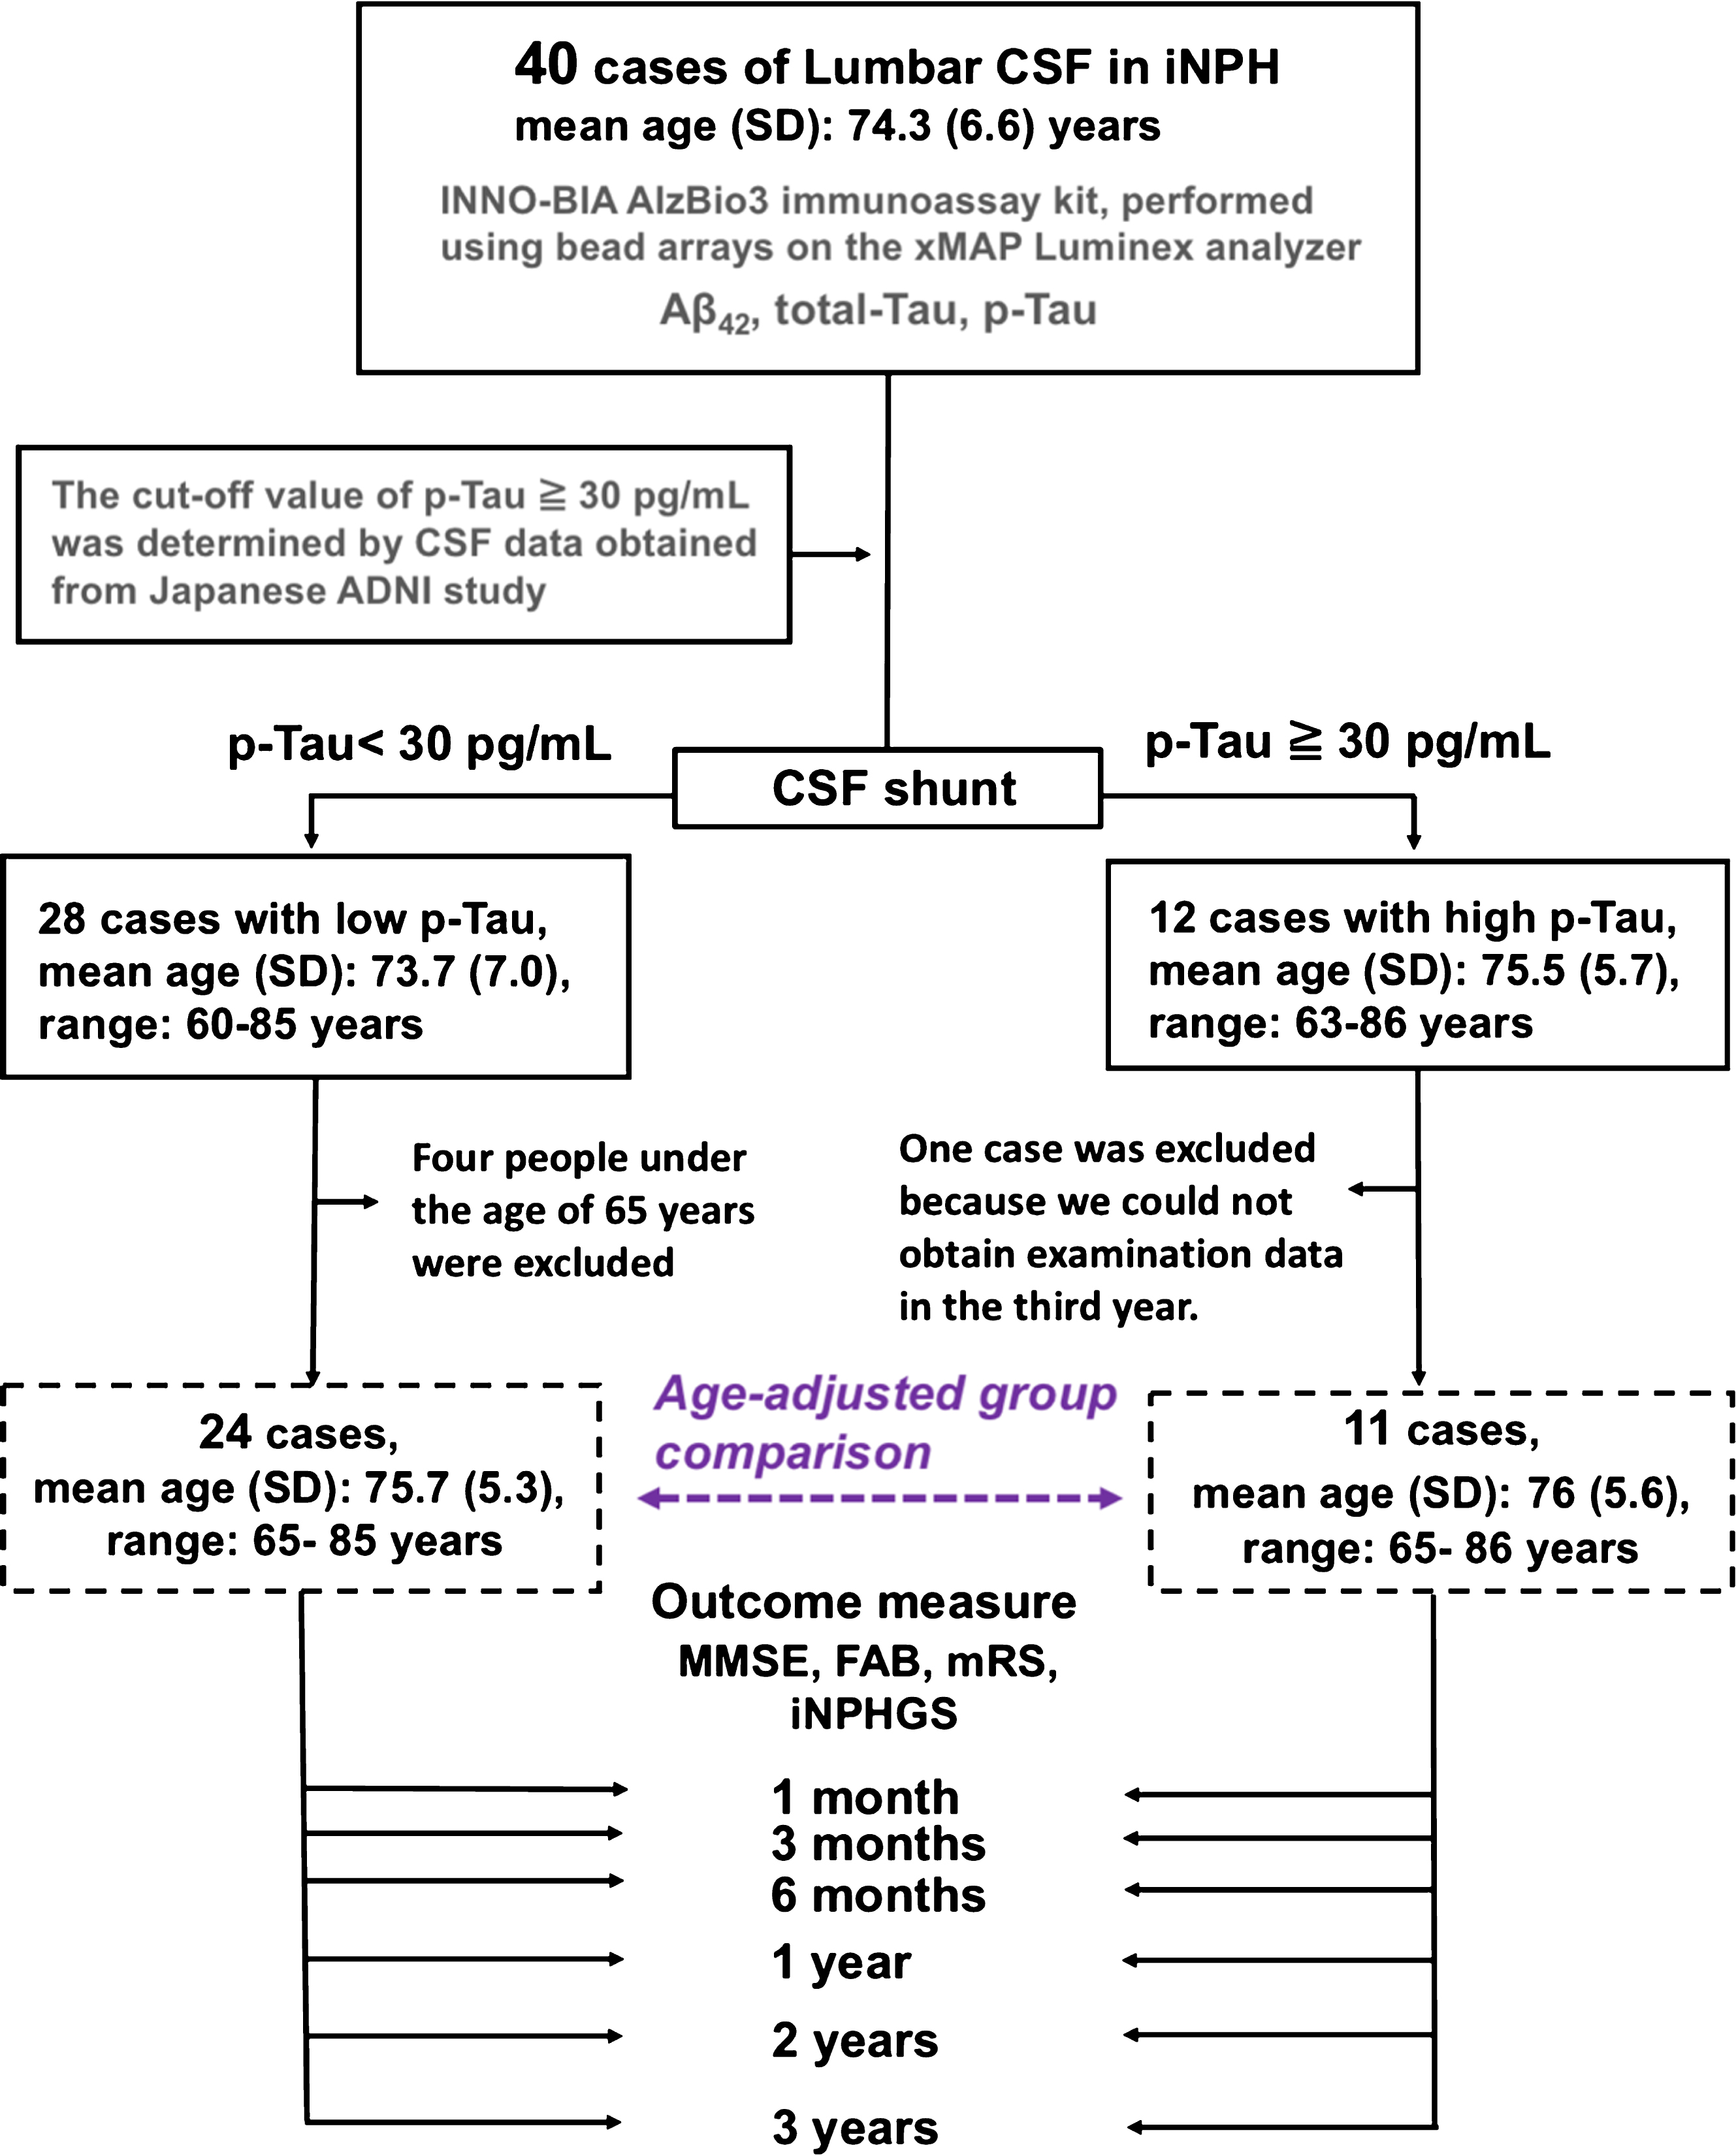 Study patient flow chart. Forty patients with a diagnosis of iNPH who had three years of follow-up after lumboperitoneal shunting were divided into two groups according to their CSF p-Tau levels: 28 patients with p-Tau levels <30 pg/mL, and 12 patients with p-Tau levels ≥30 pg/mL. After adjustment for age (range 65–85 years old), 24 patients were included in a low p-Tau group, and 11 patients in a high p-Tau group. Outcome measures obtained at the indicated points during follow-up were compared between the groups and with the preoperative values.